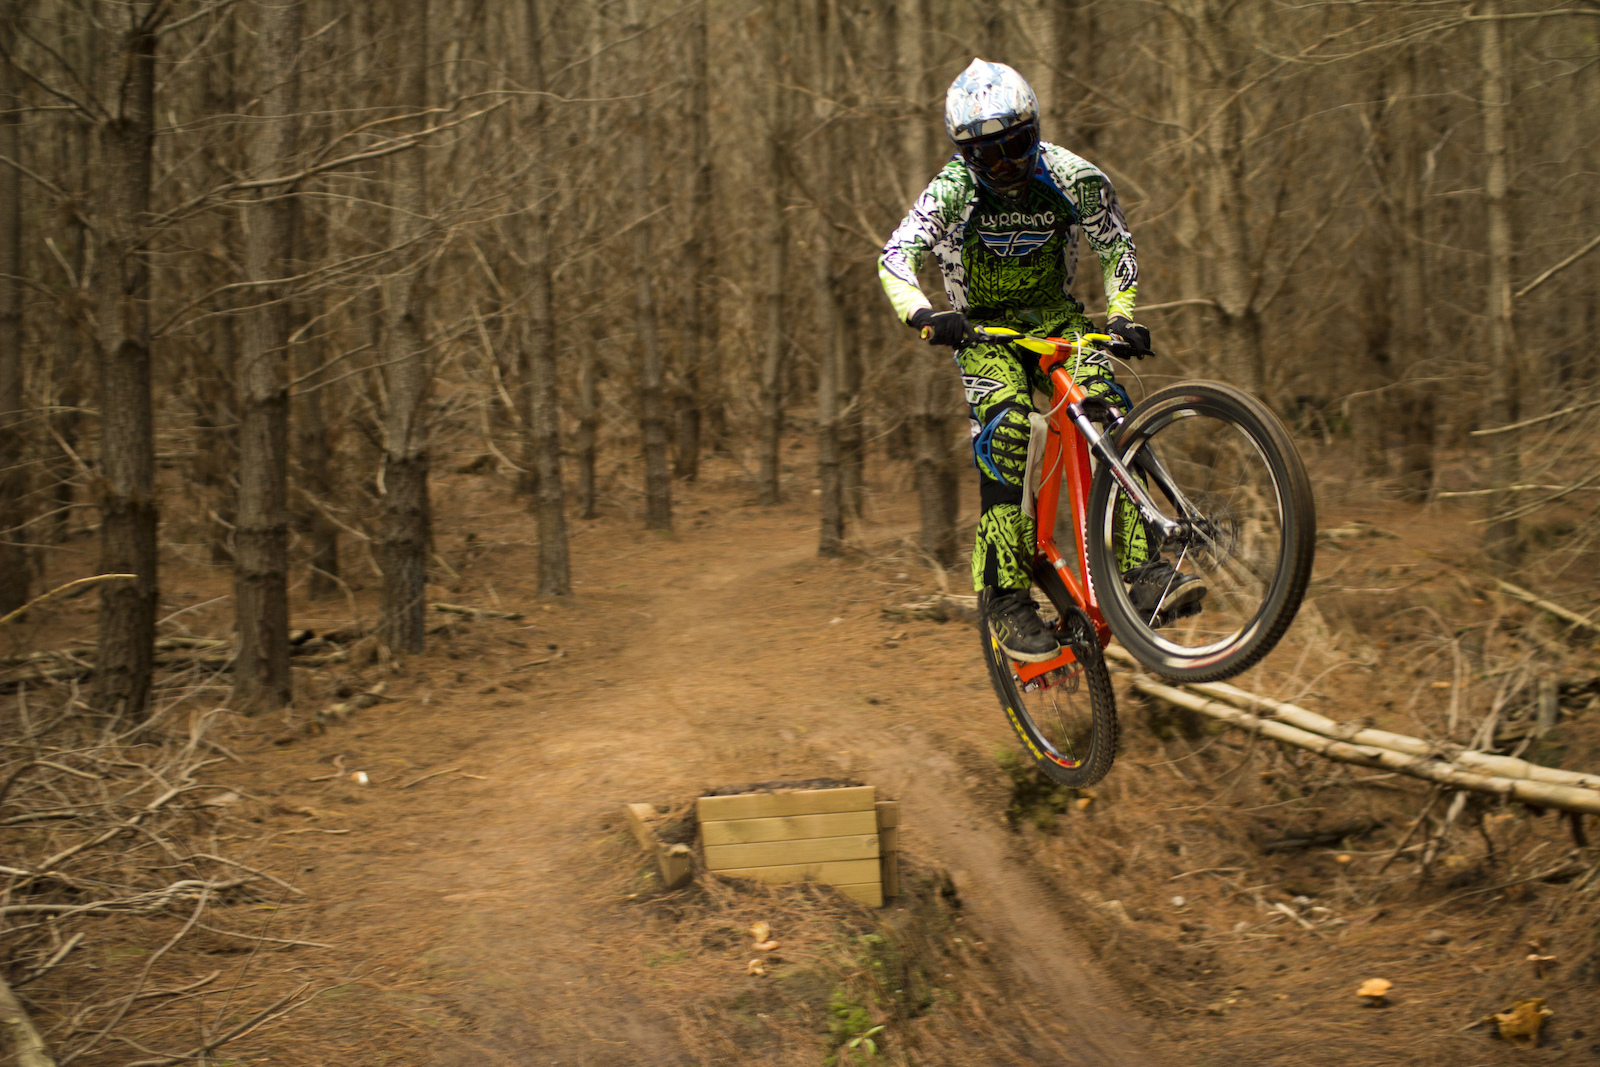 Dan getting stoked on his hardtail today while riding at Bennets!